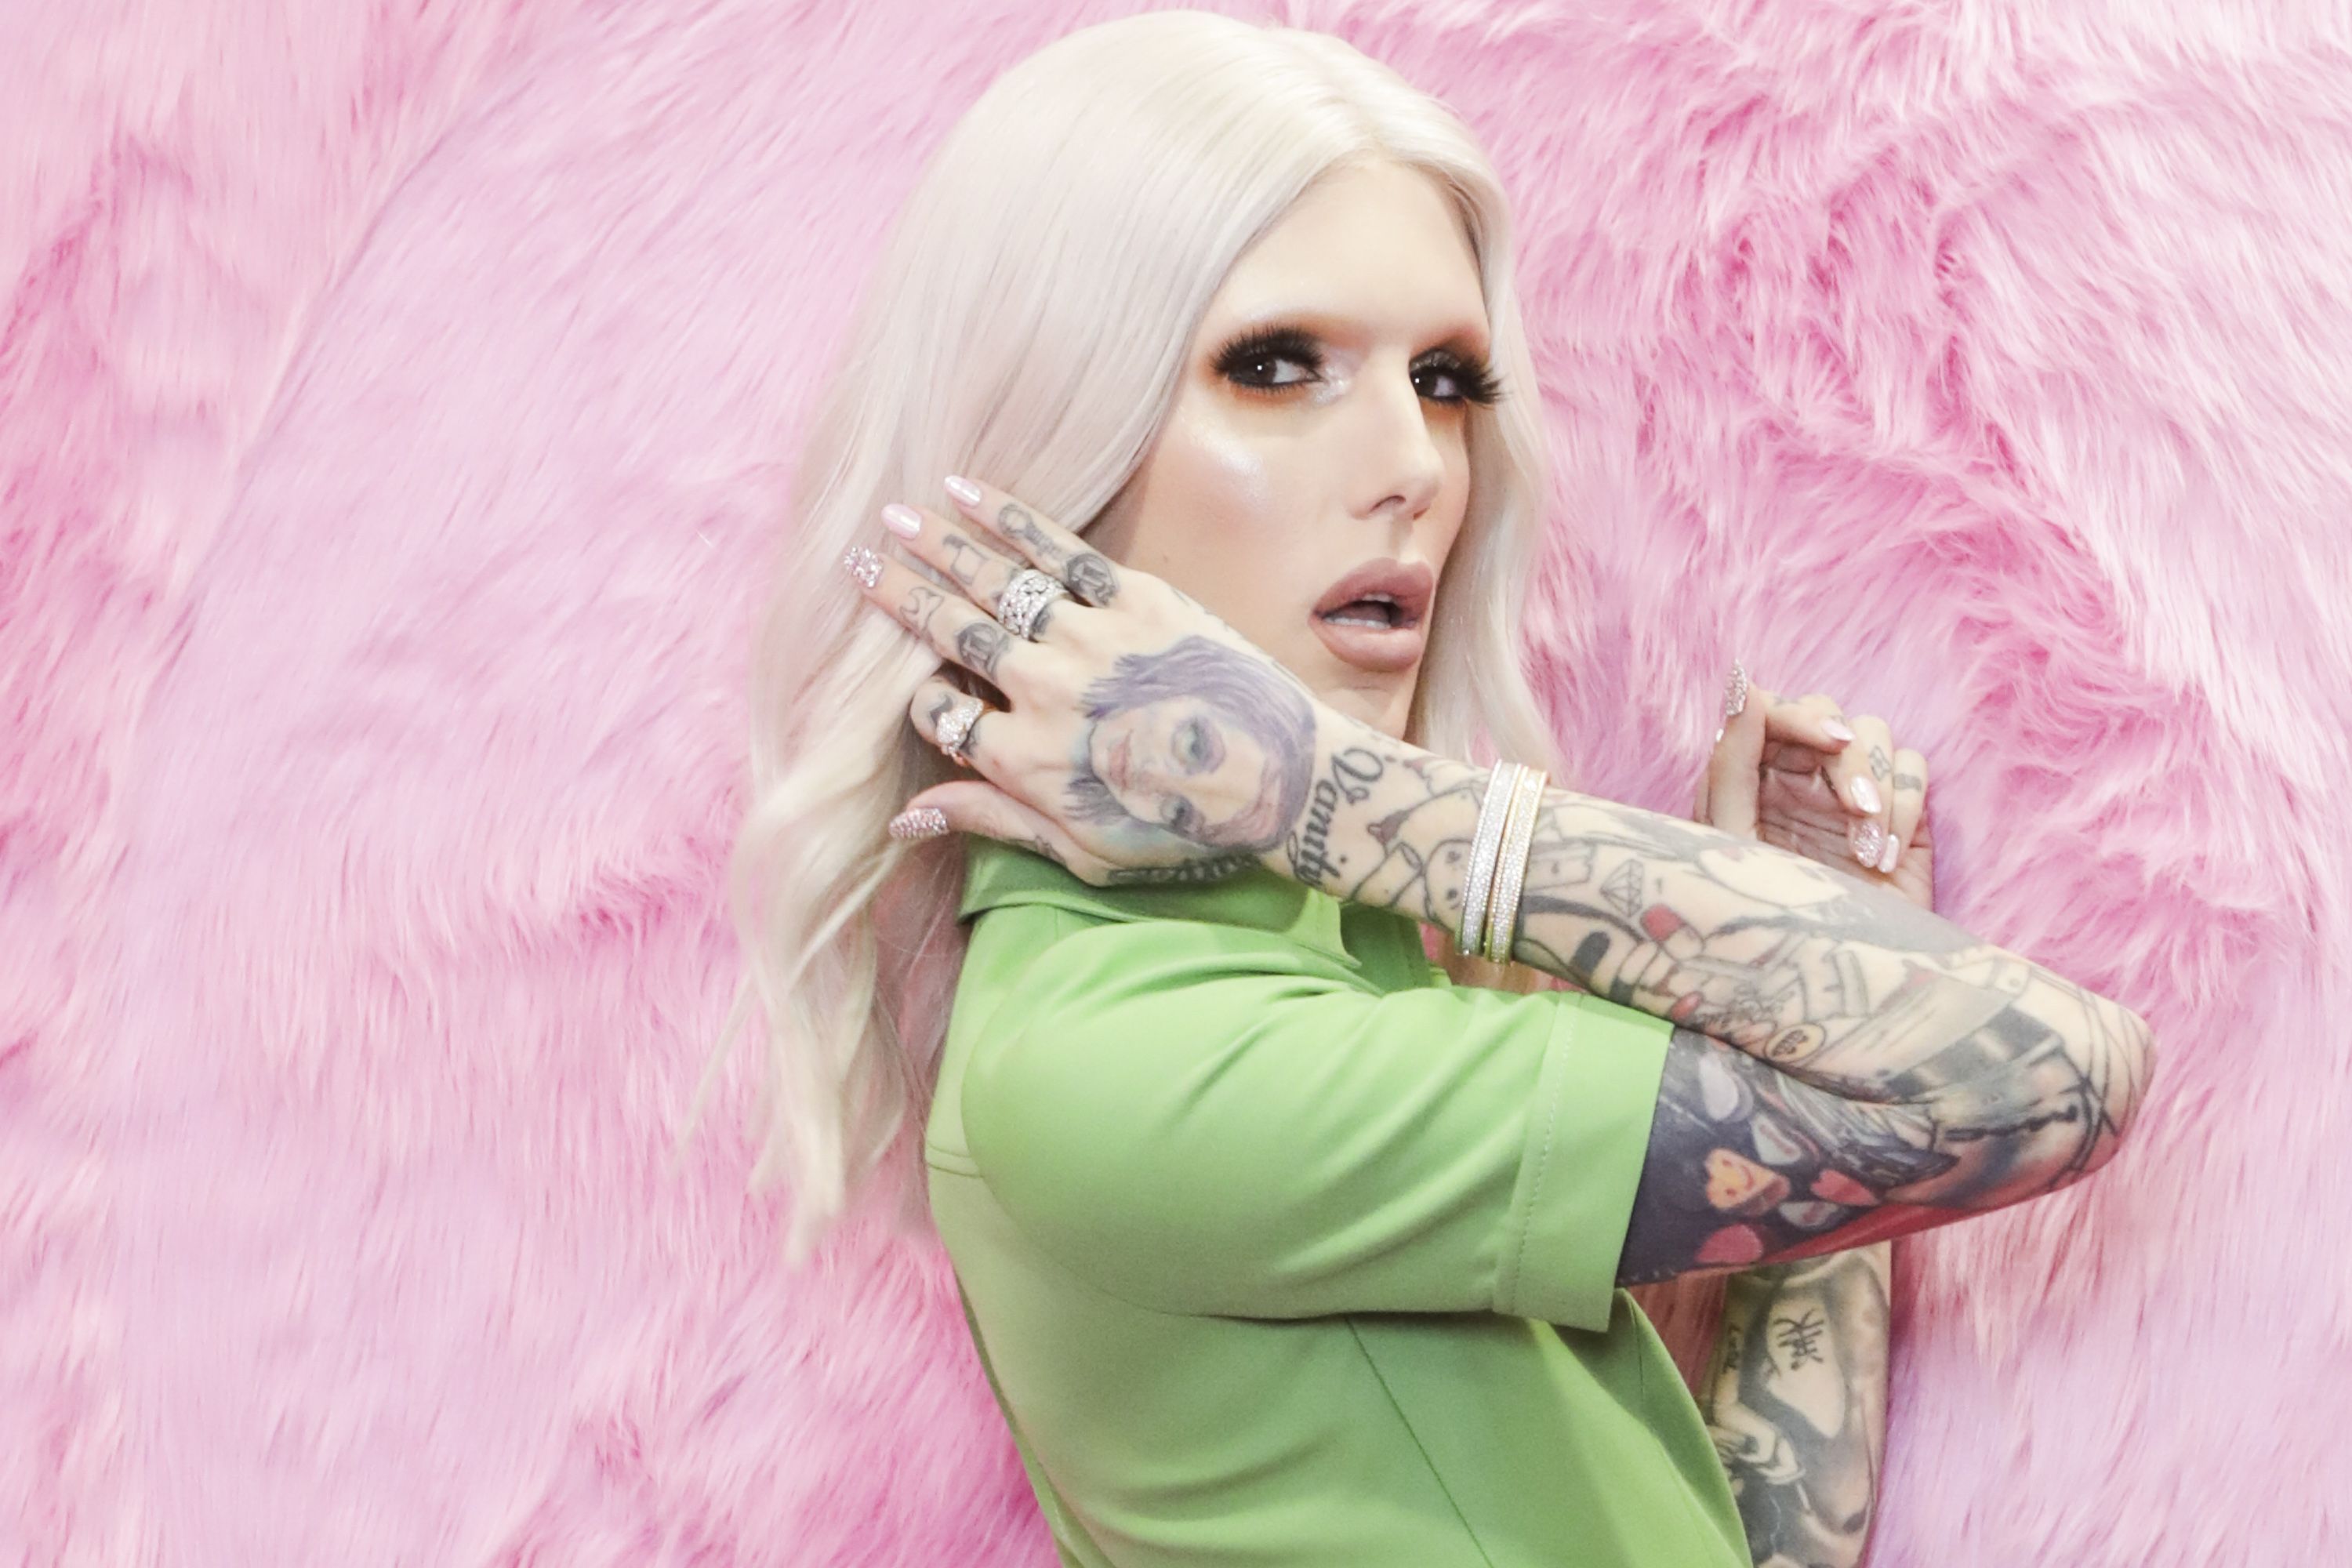 Morphe's Jeffree Star split shows high risk of reliance on influencers